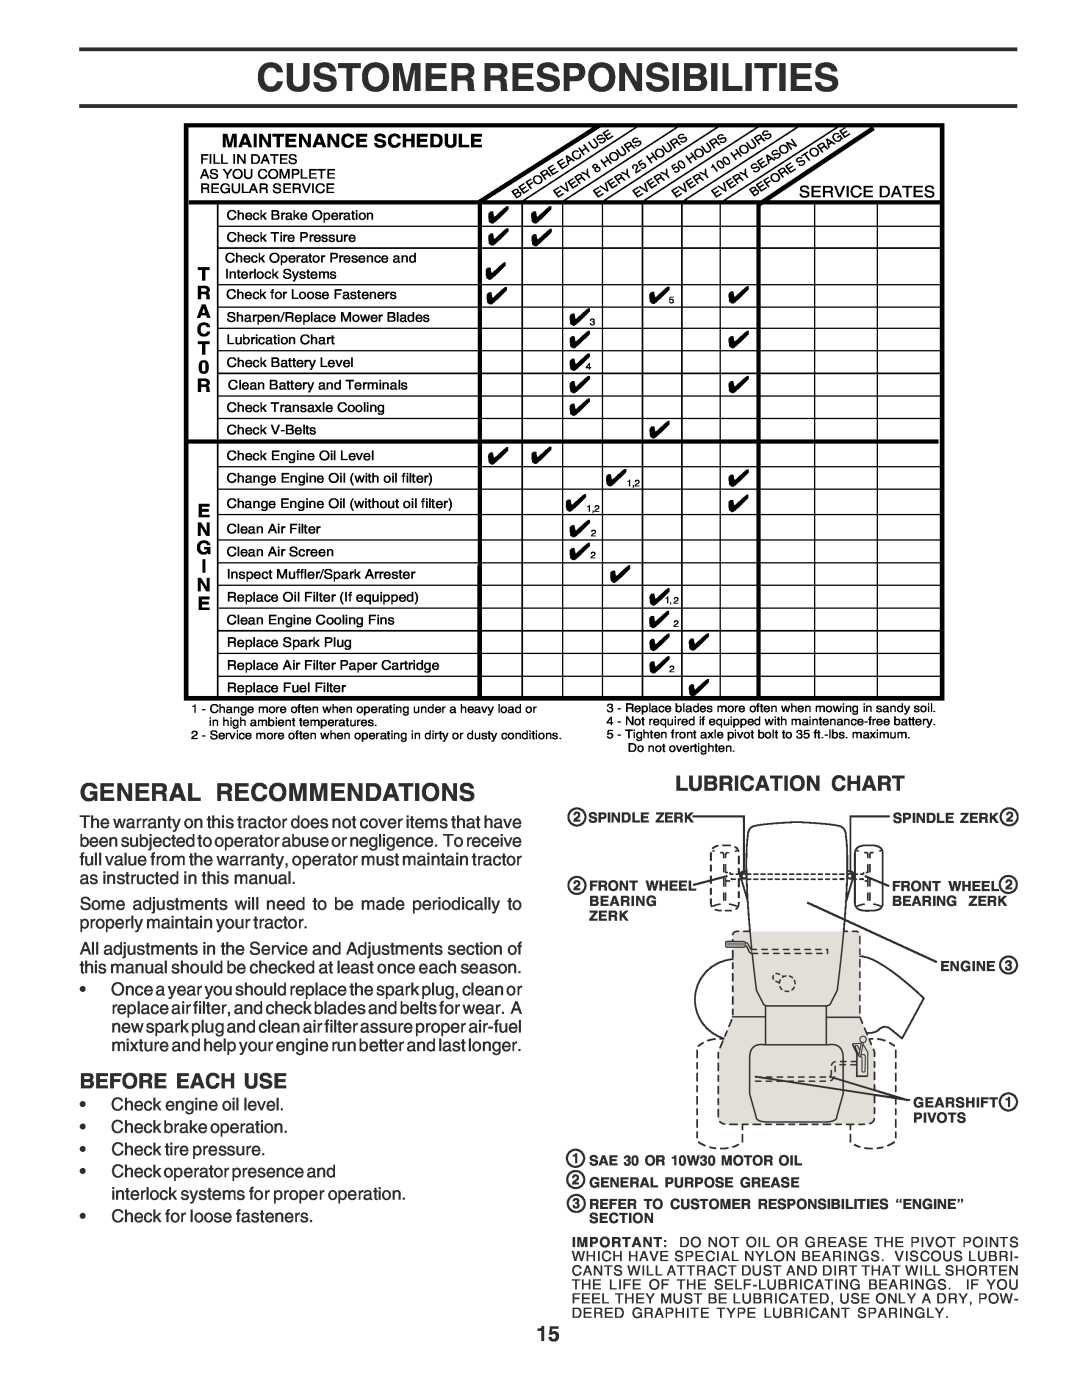 Poulan PR1742STF owner manual Customer Responsibilities, General Recommendations, Lubrication Chart, Before Each Use 